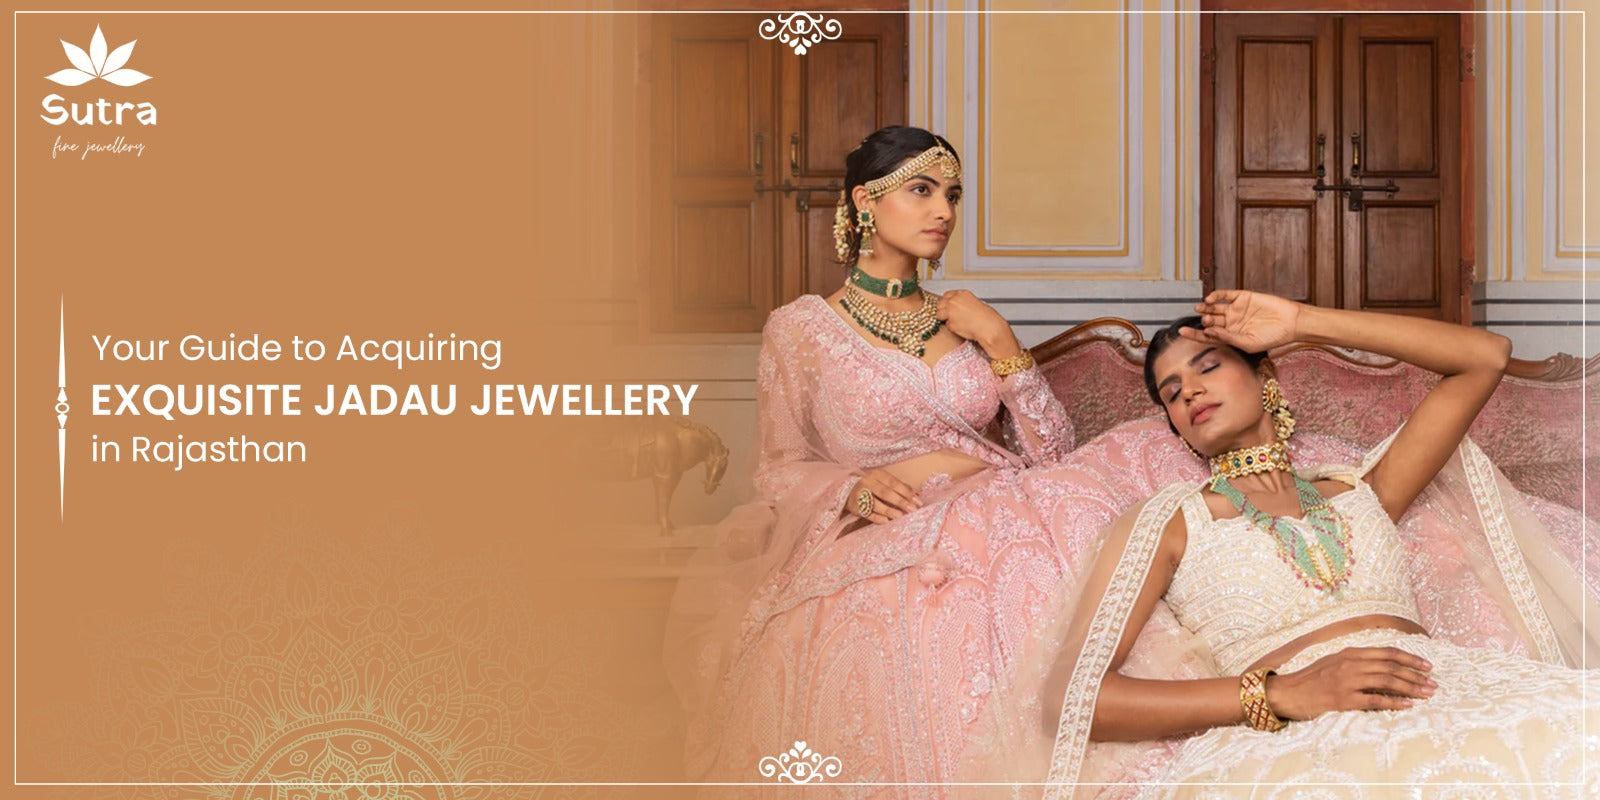 Your Guide to Acquiring Exquisite Jadau Jewellery in Rajasthan